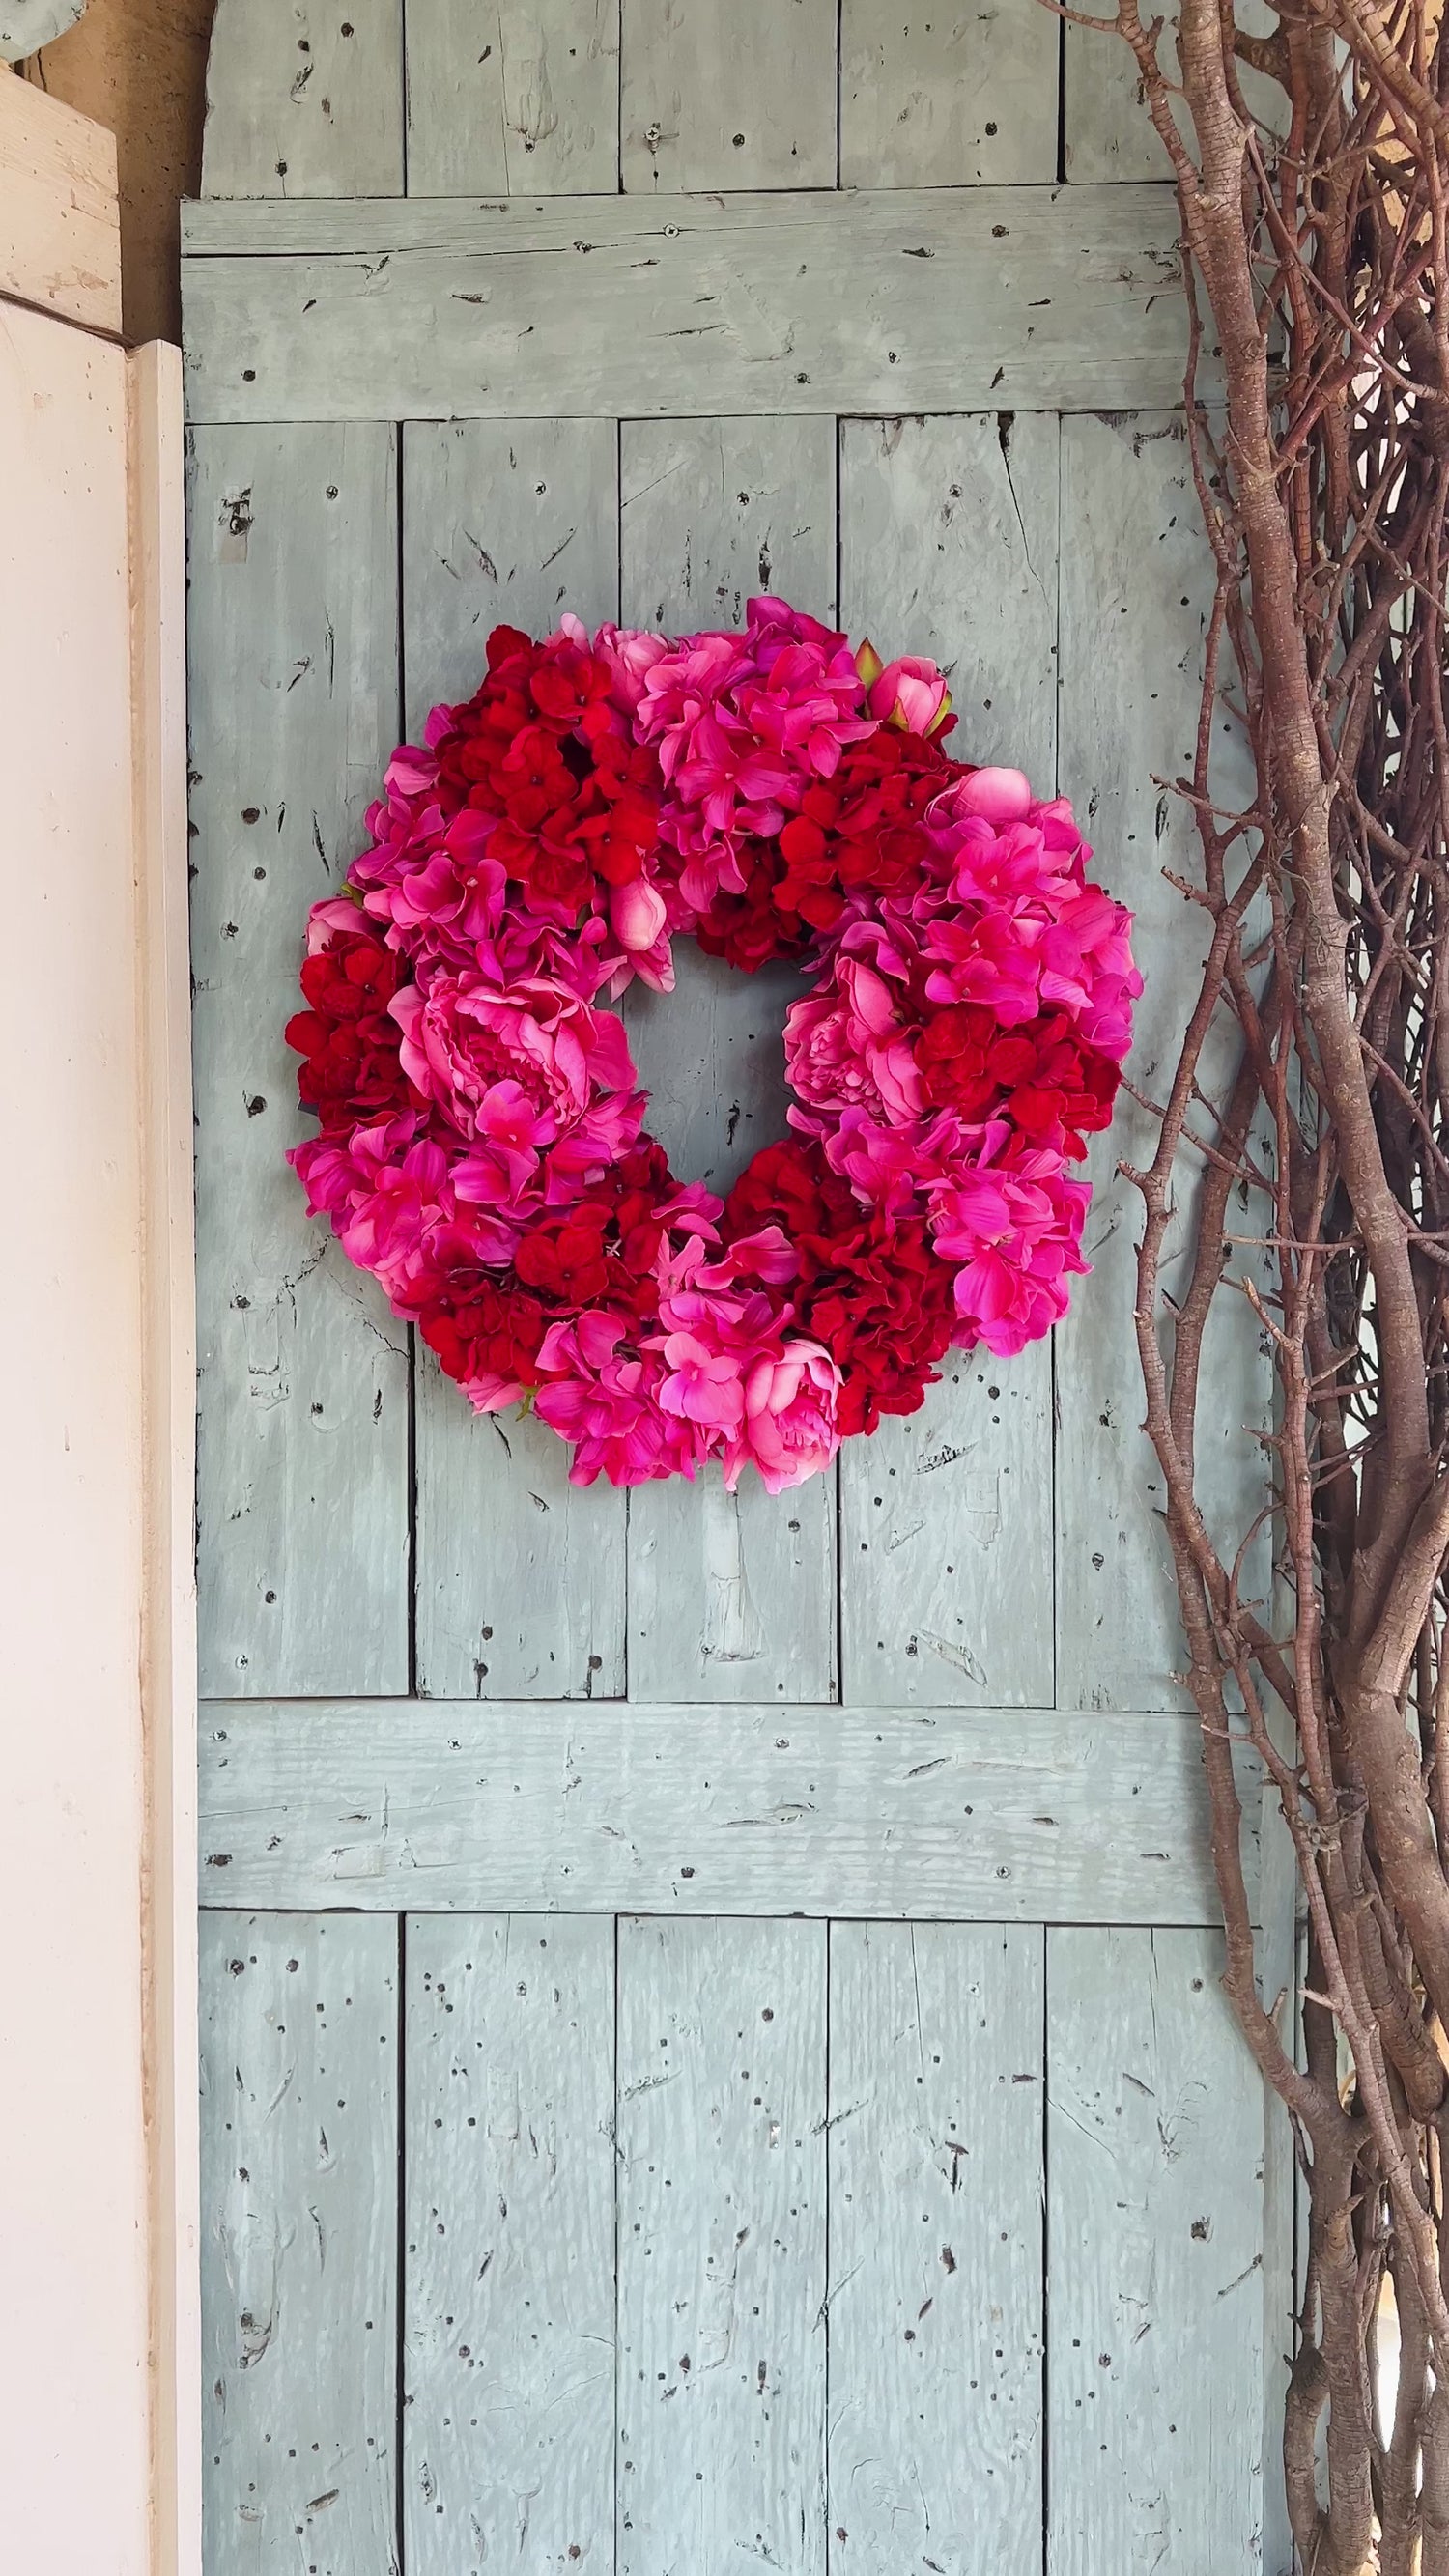 Pink and red hydrangea and peony floral wreath